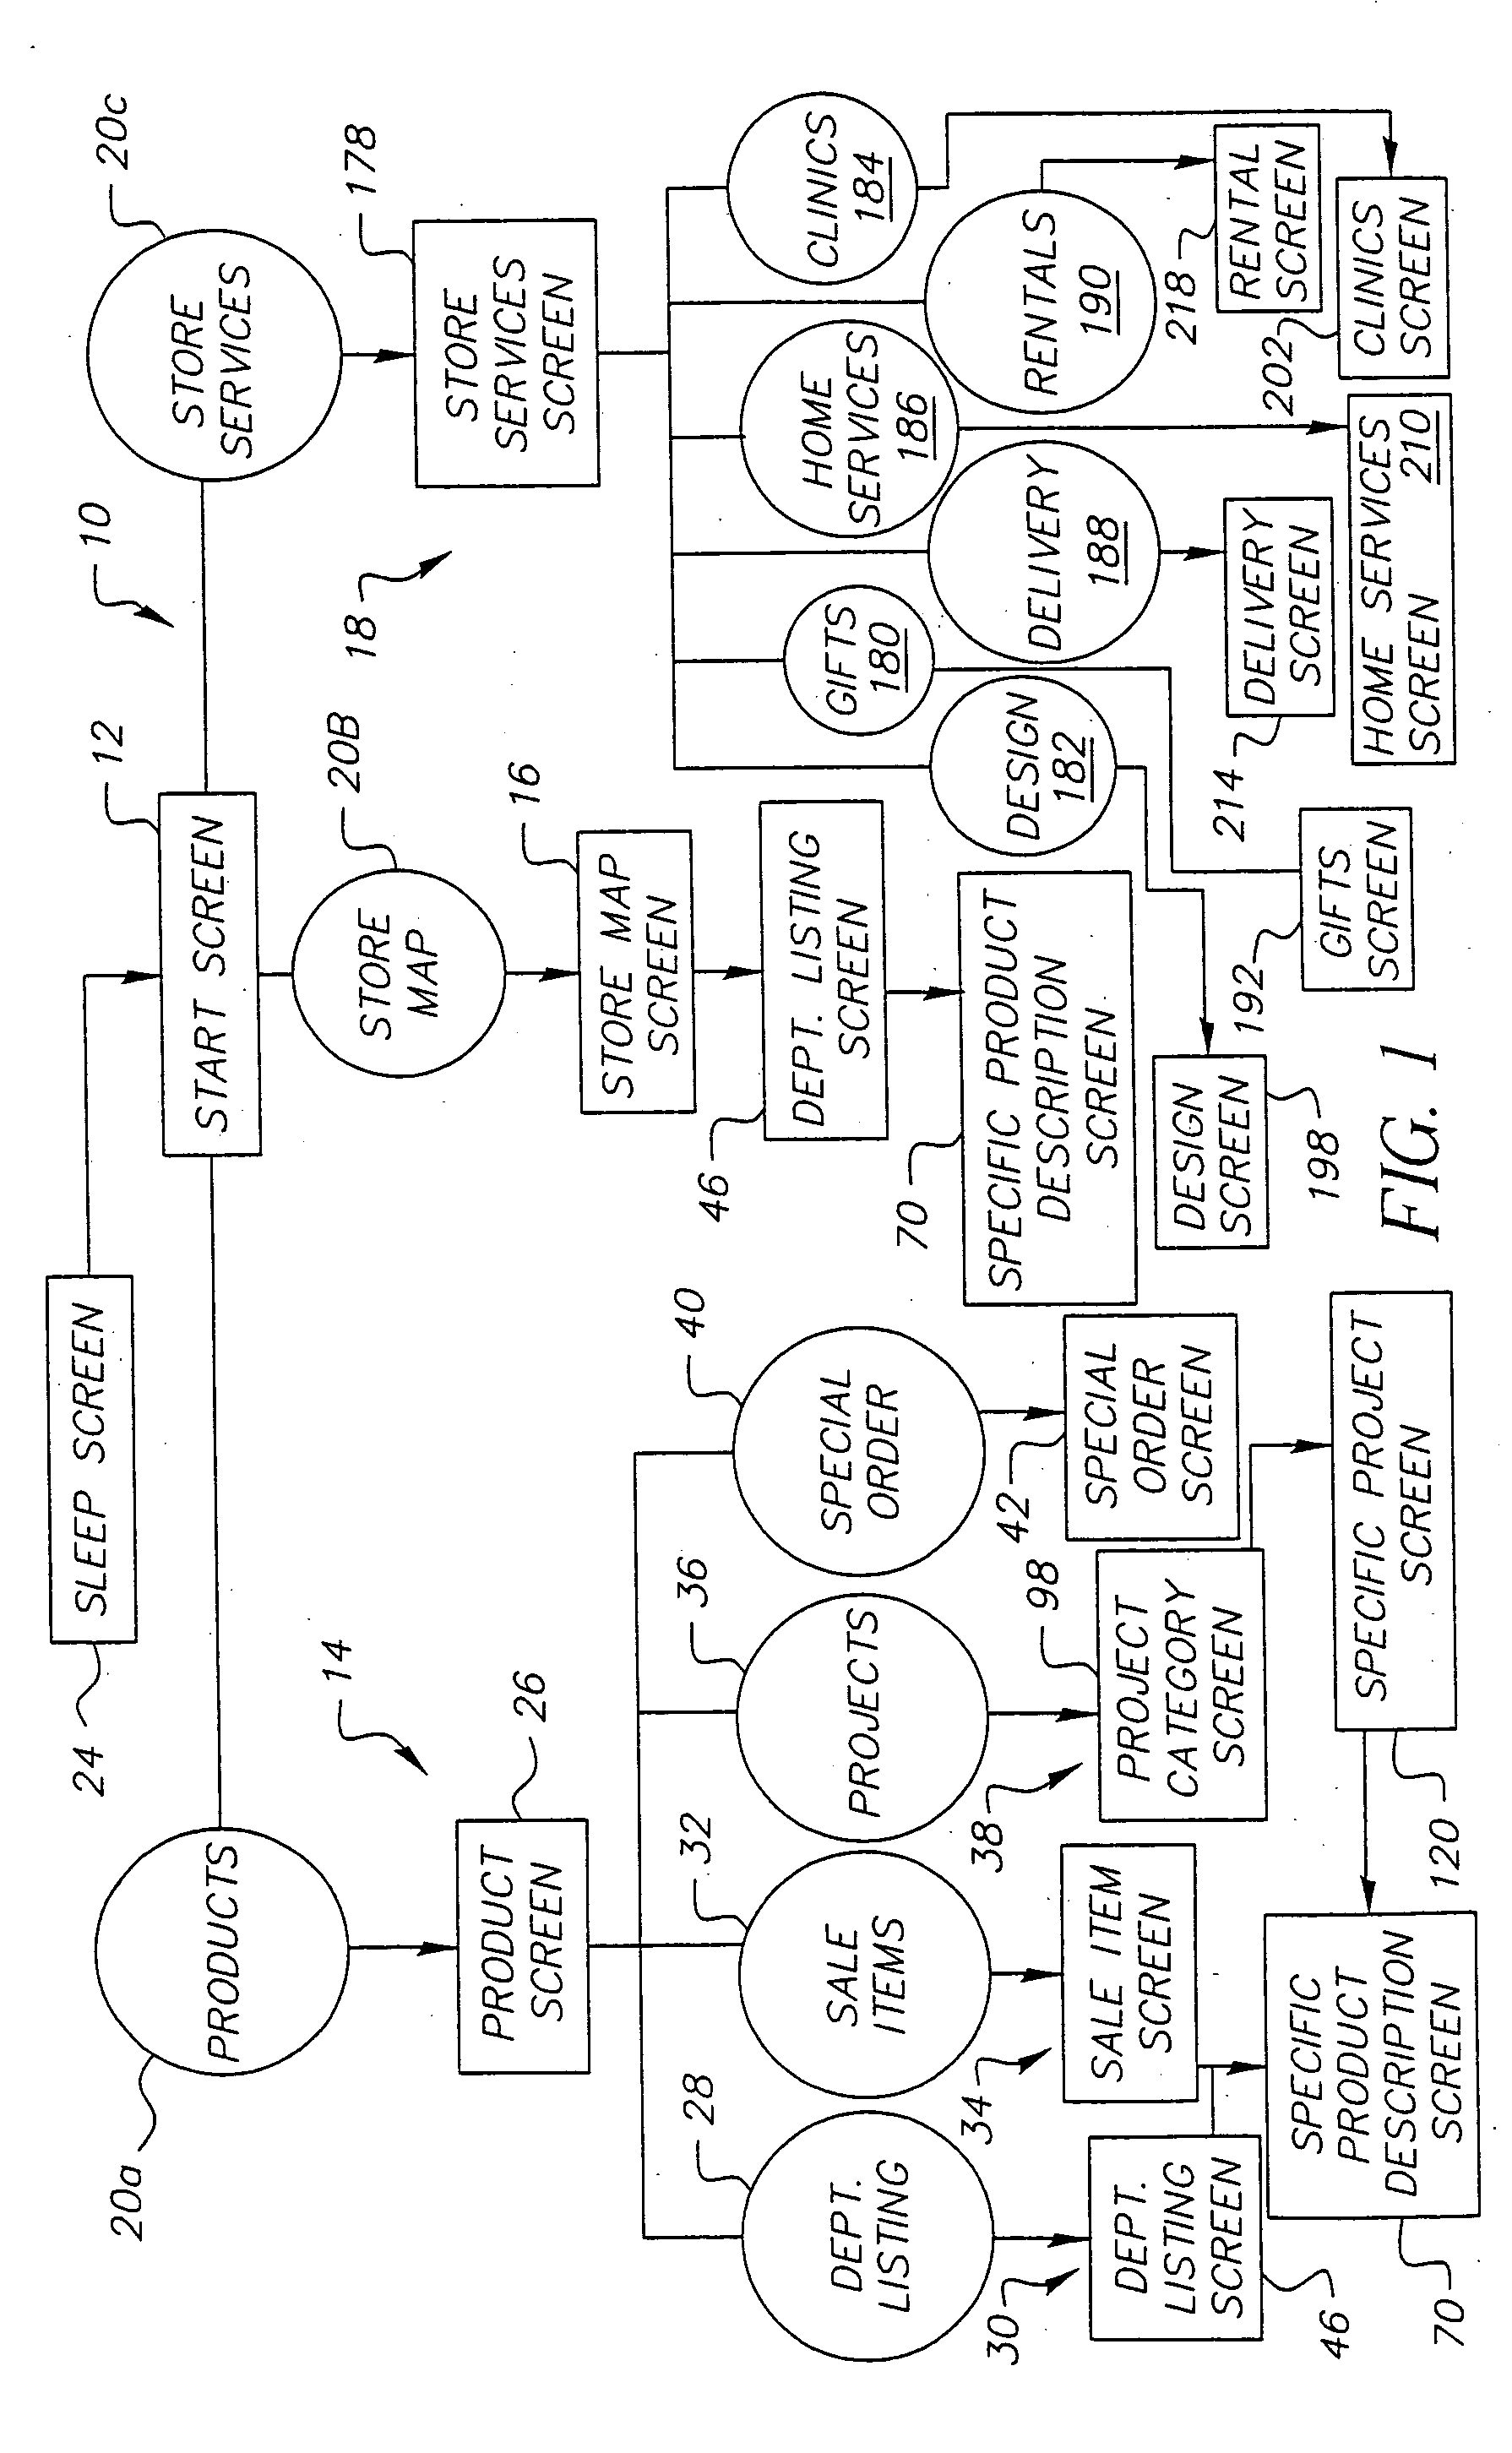 Operator interface system for a touch screen device